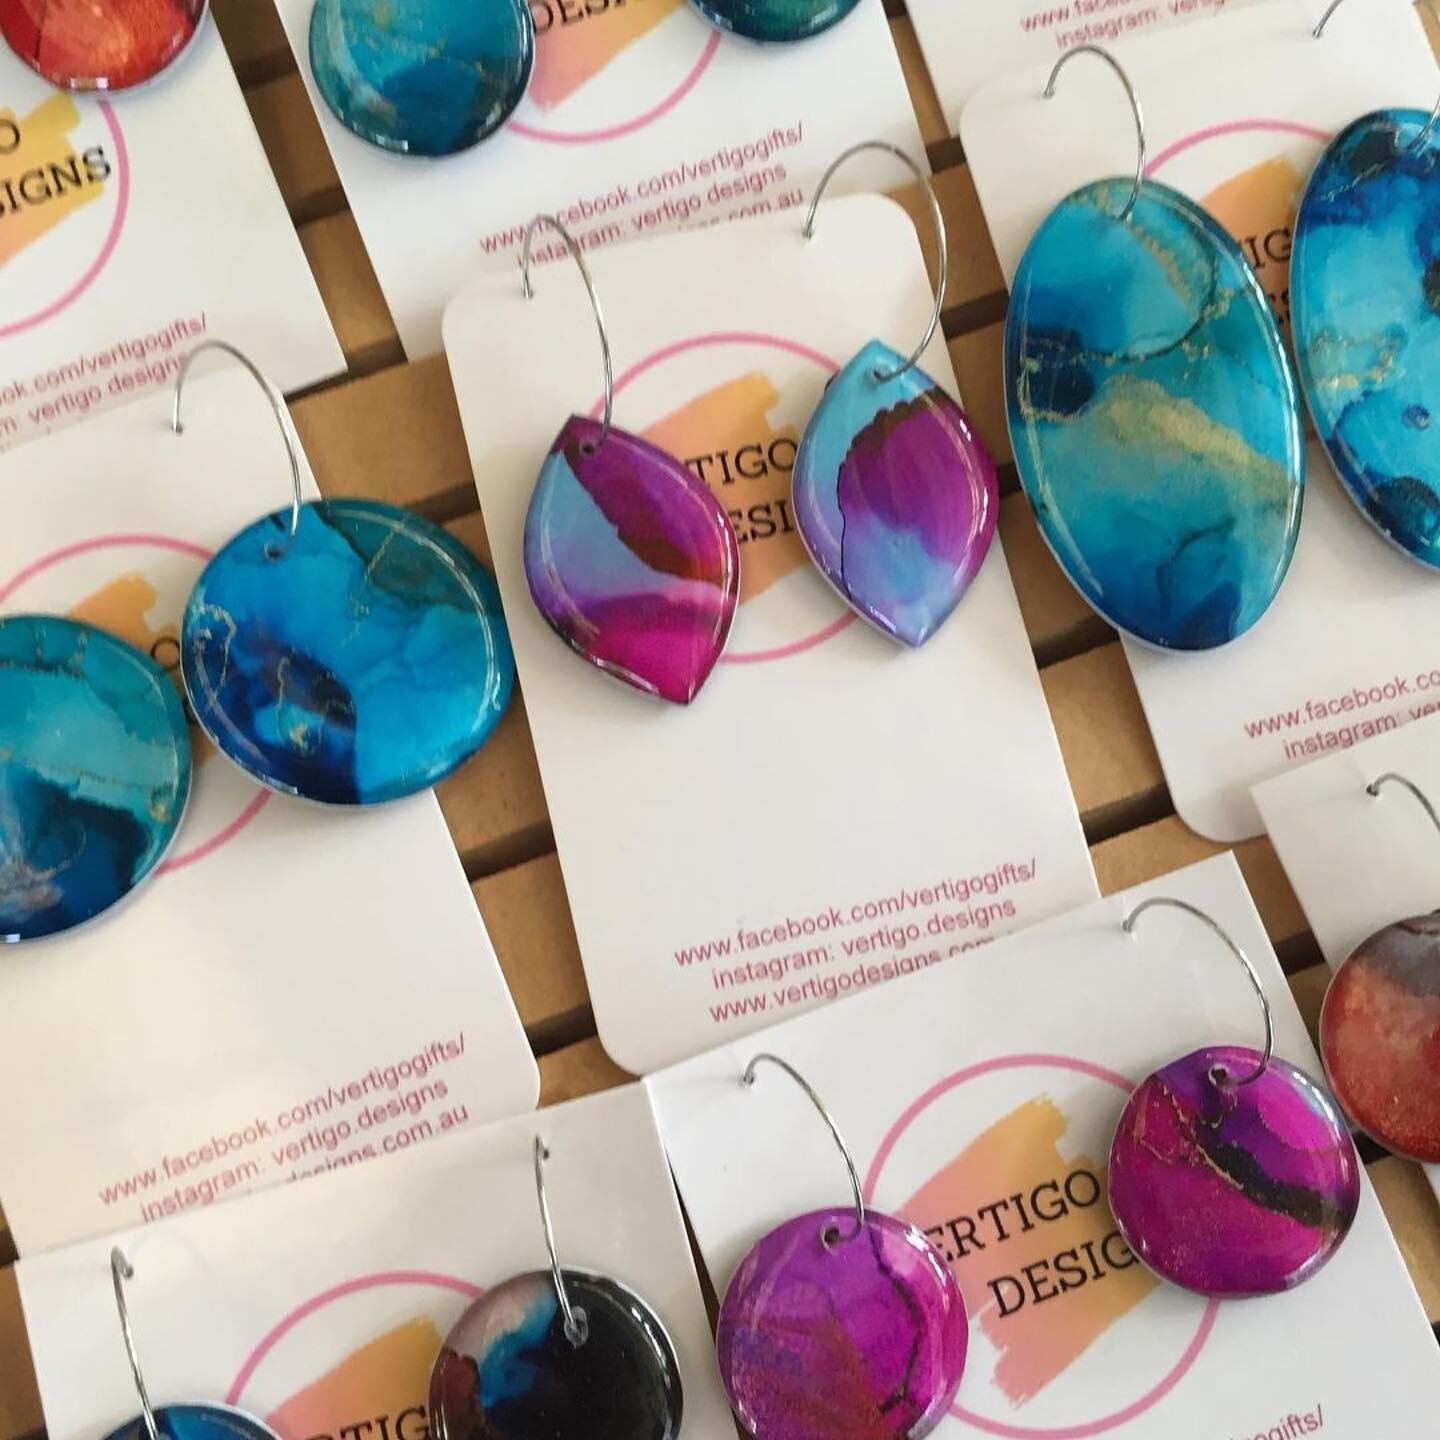 A big welcome to @vertigo.designs to our market. Jewellery Designer Karen has a bit of an earring addiction and loves creating fun and fashionable designs for others to wear. Her new range of handmade wearable art resin pieces are extremely lightweig